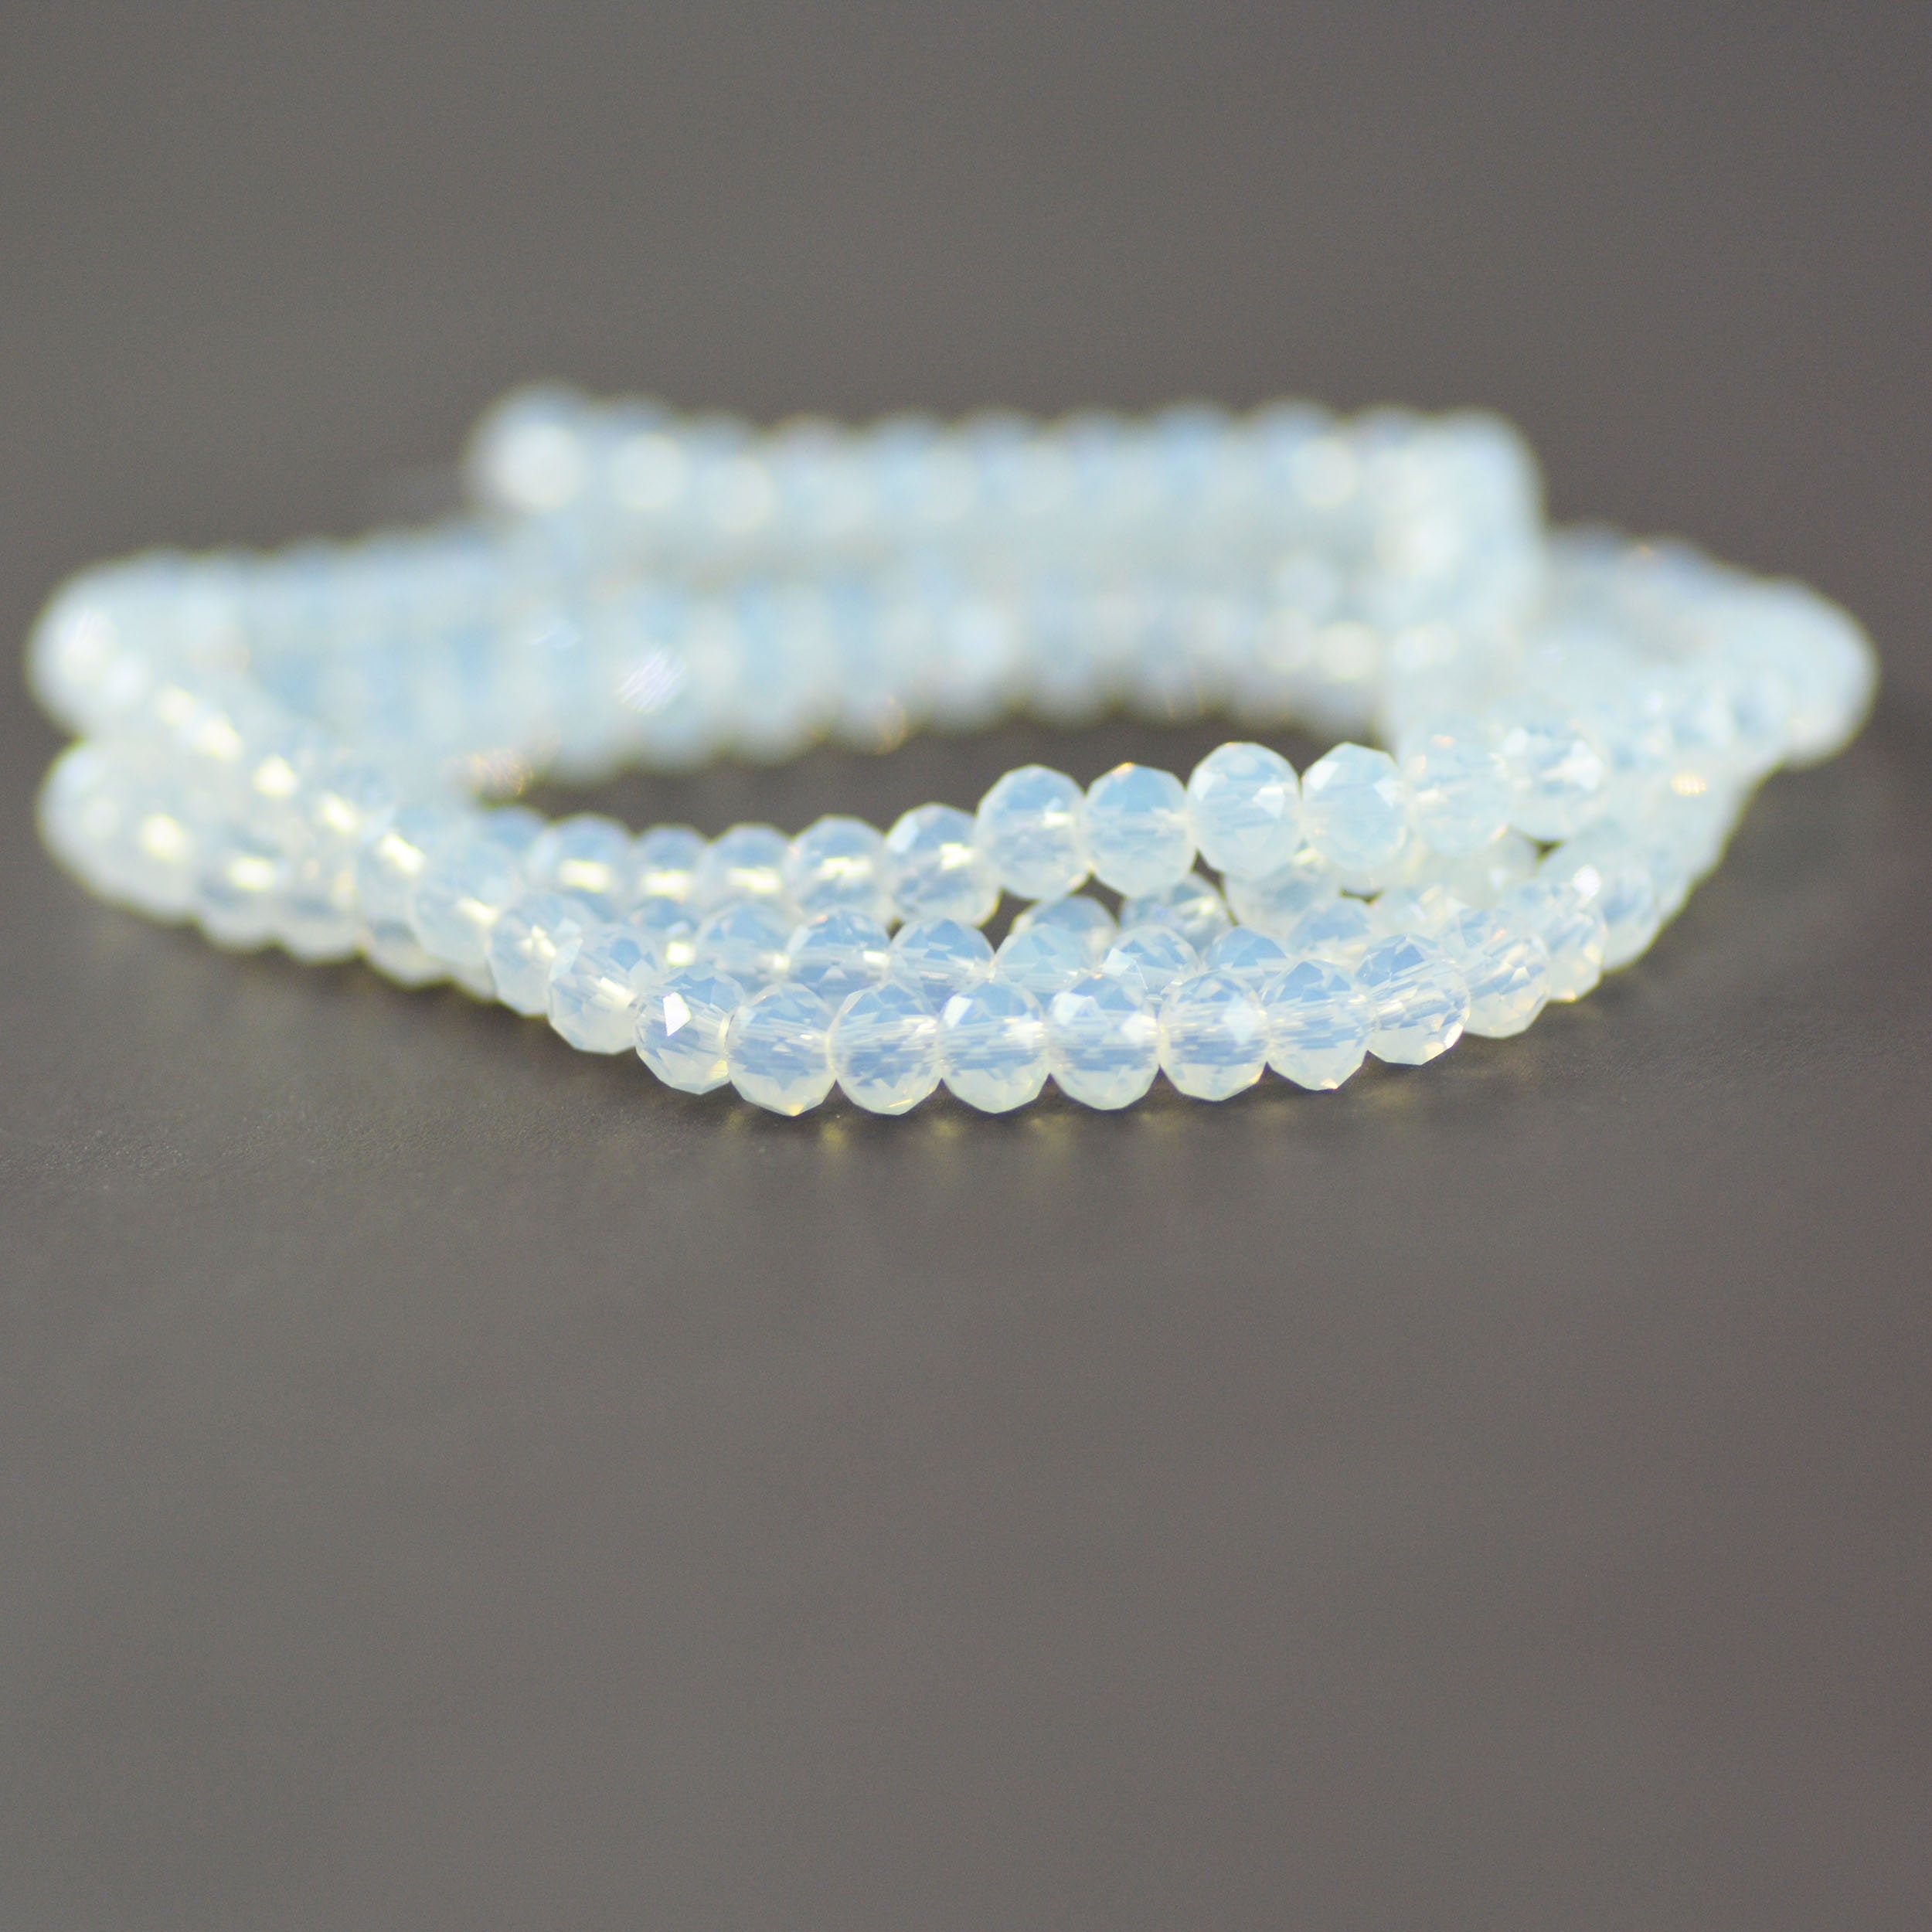 Chinese Crystal Rondelle Beads 3x2mm BLUE OPAL AB